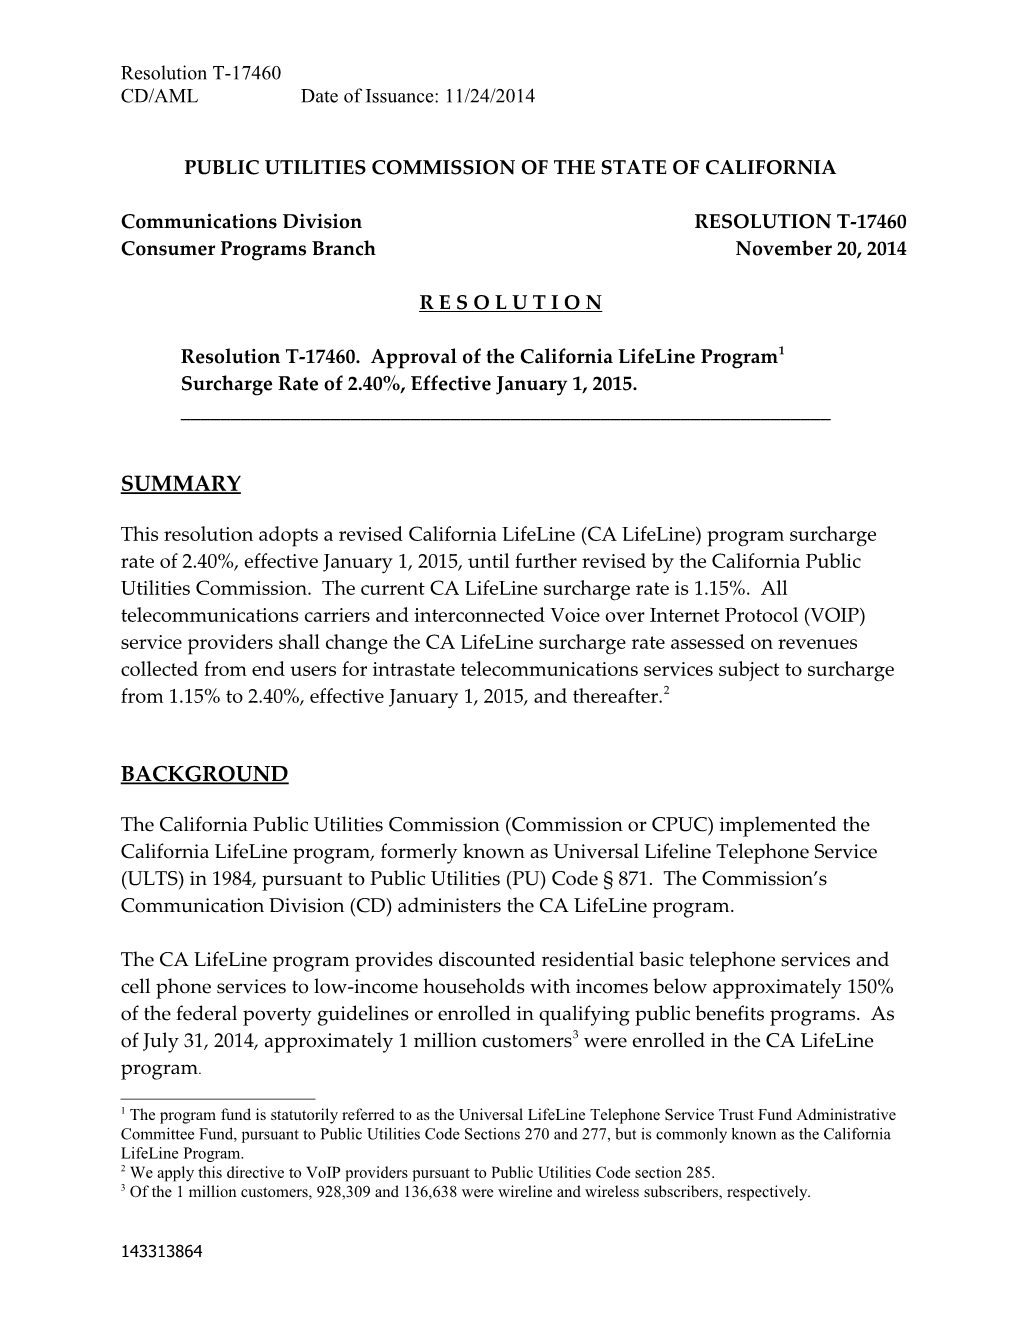 Public Utilities Commission of the State of California s112